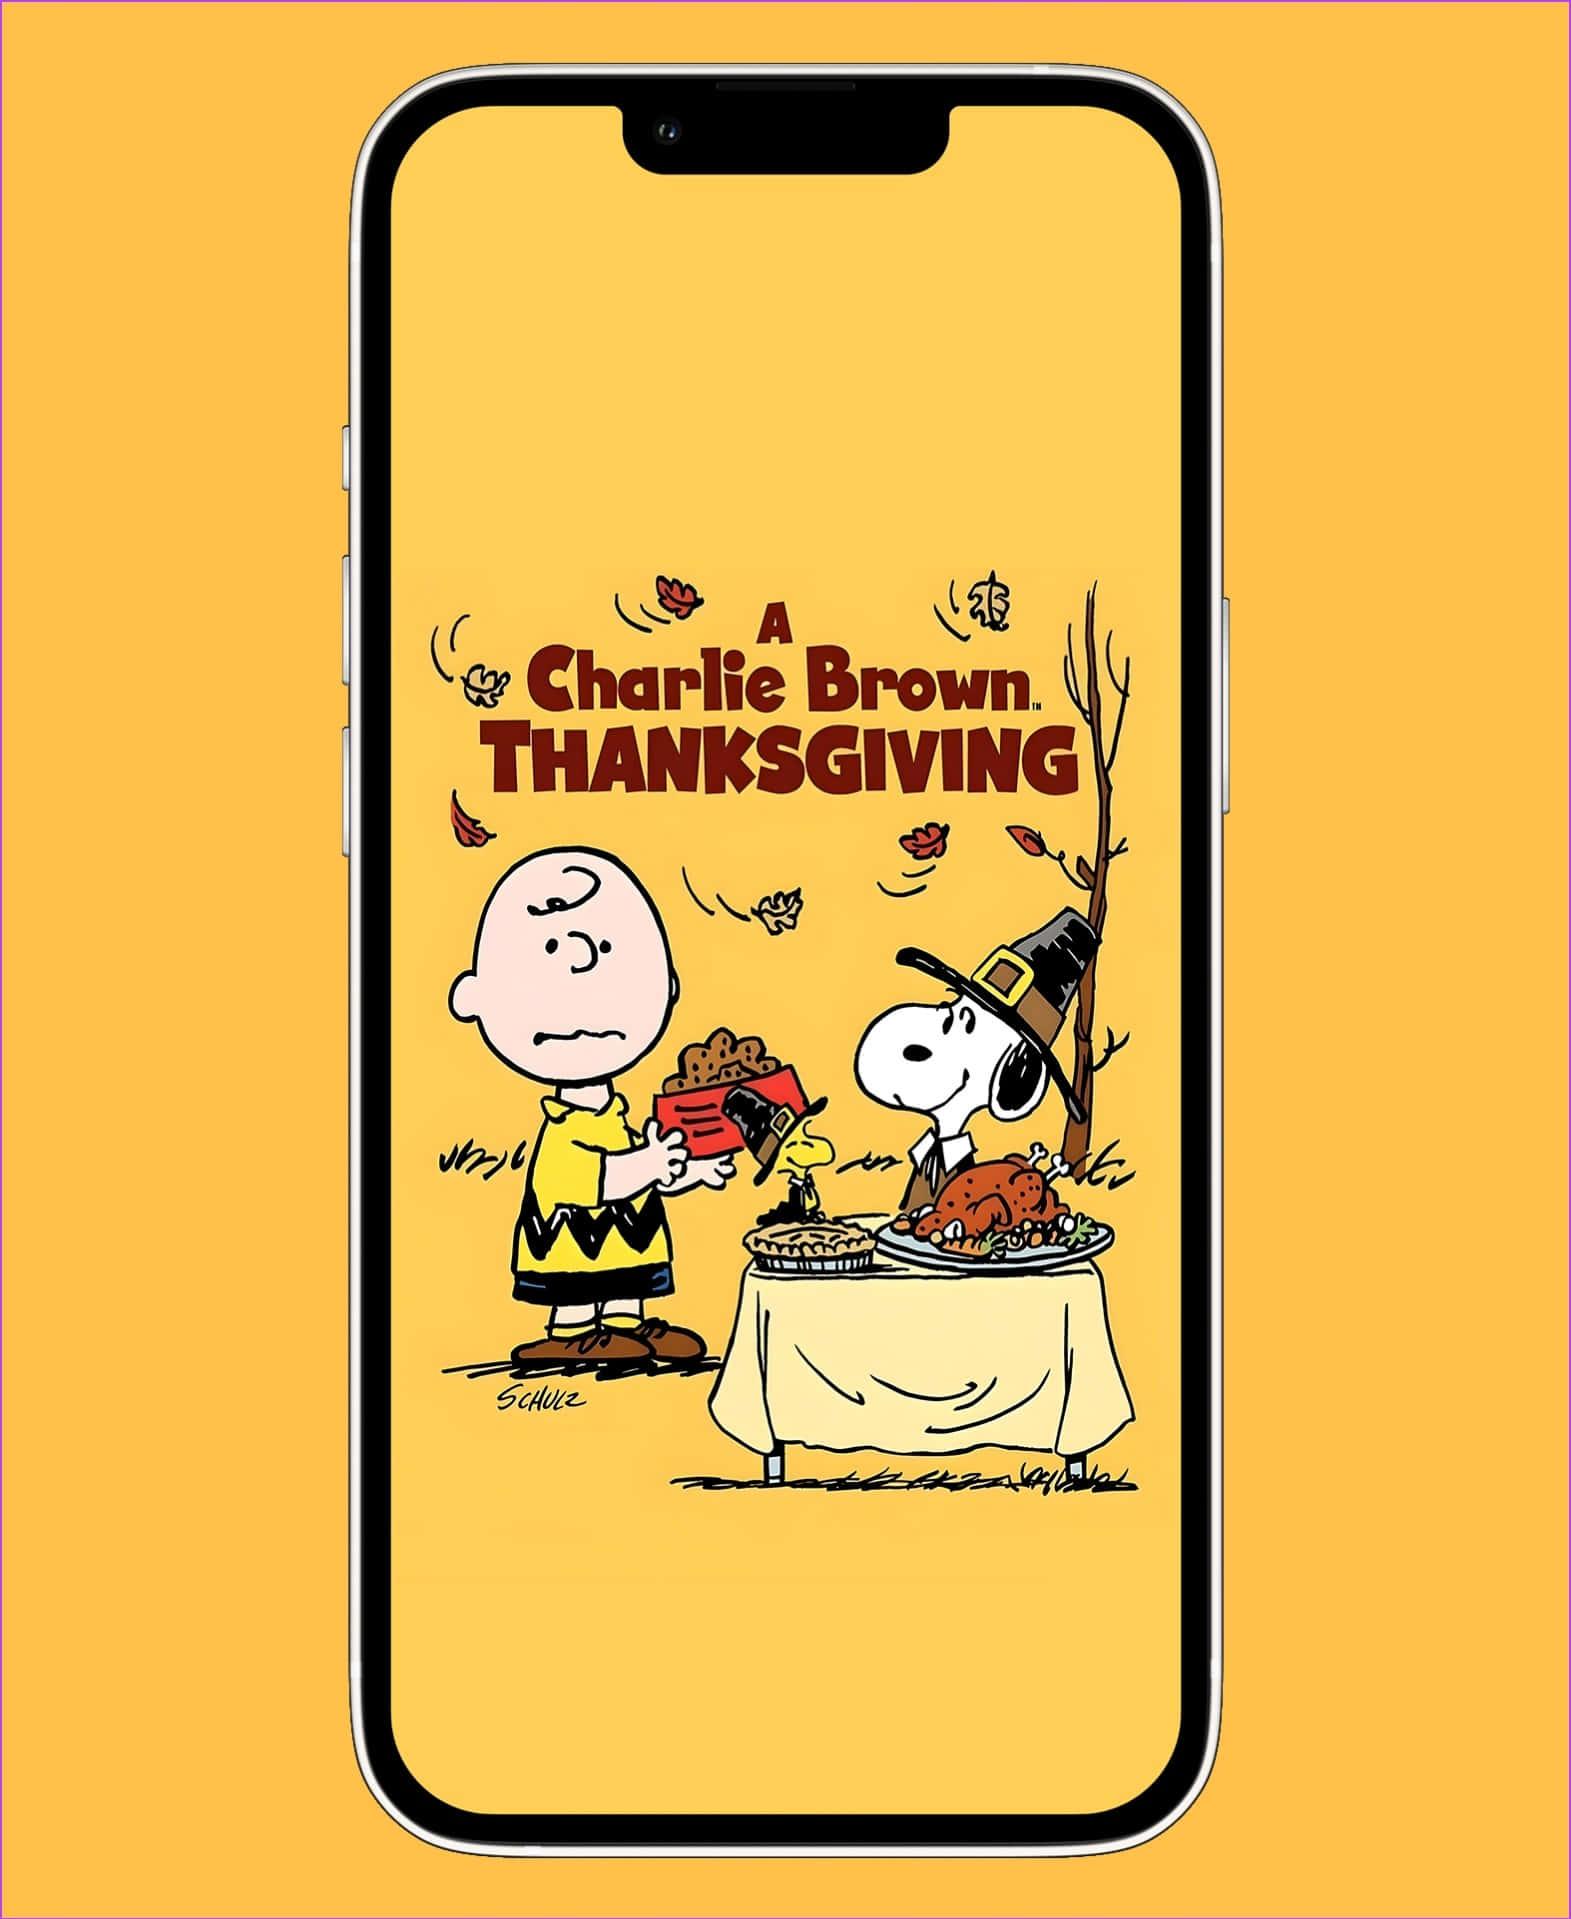 Charlie Brown The Gang Celebrate A Thanksgiving Feast